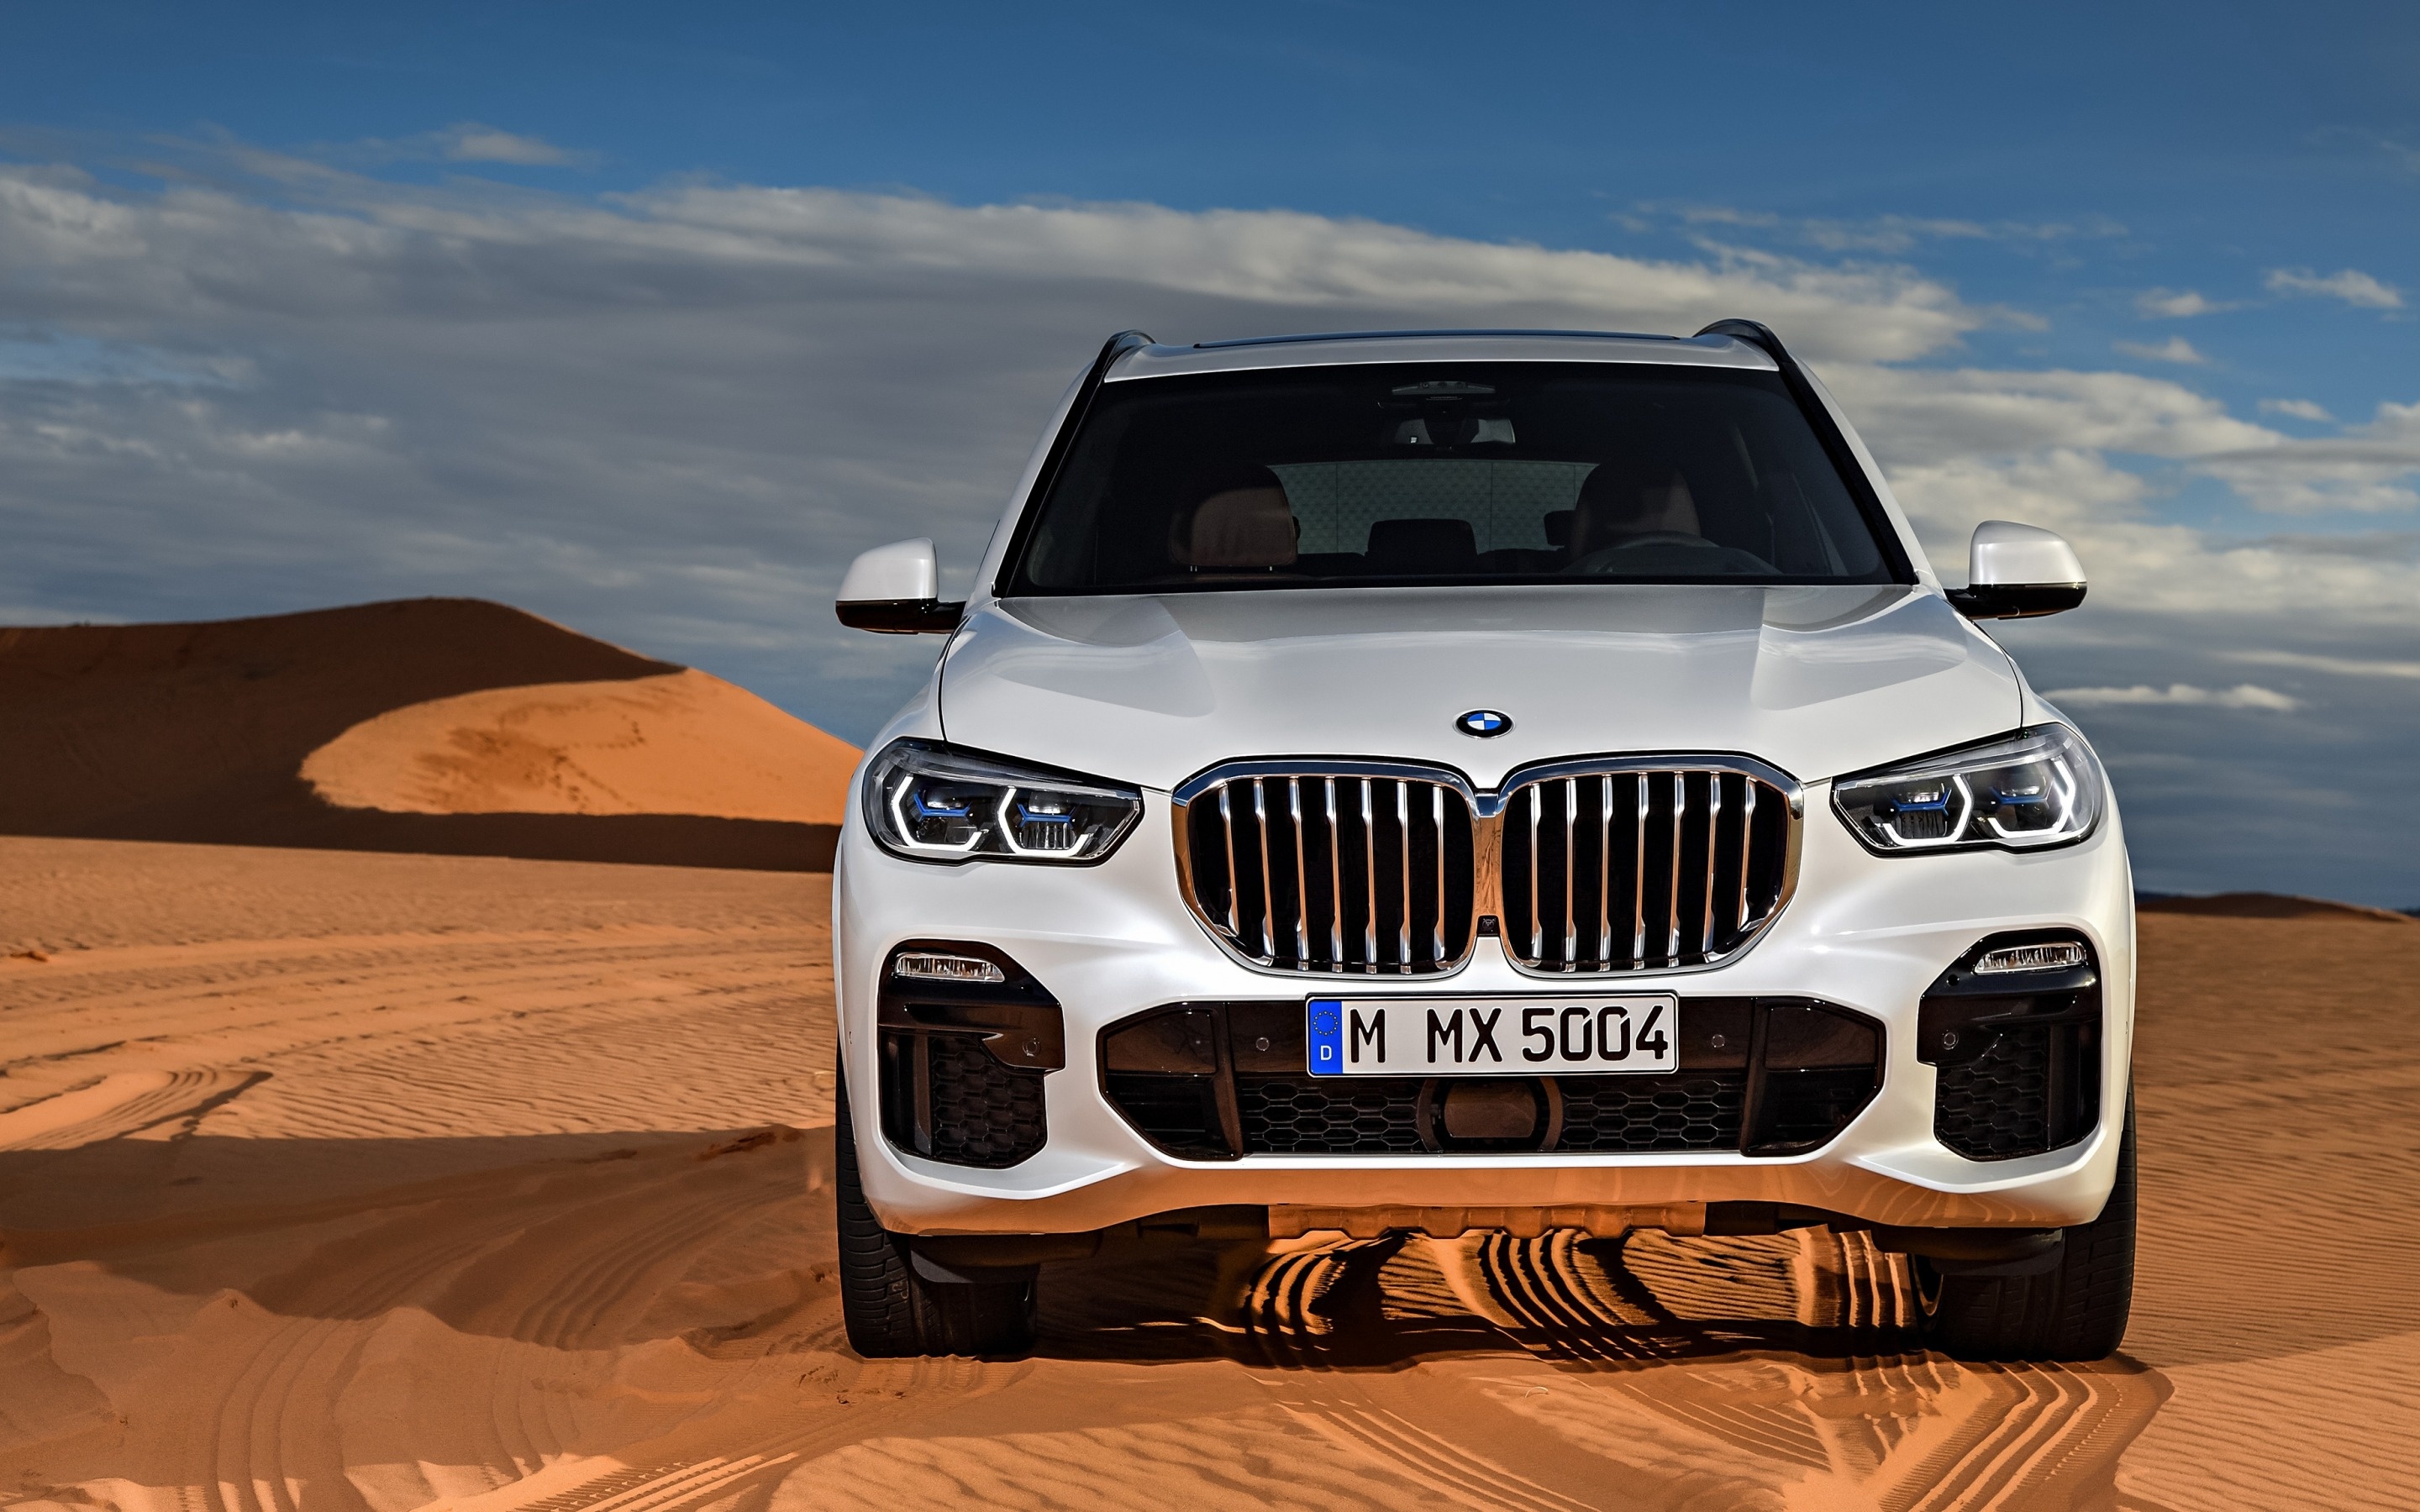 BMW X5, M Sport edition, White luxury crossover, High-quality wallpapers, 2880x1800 HD Desktop